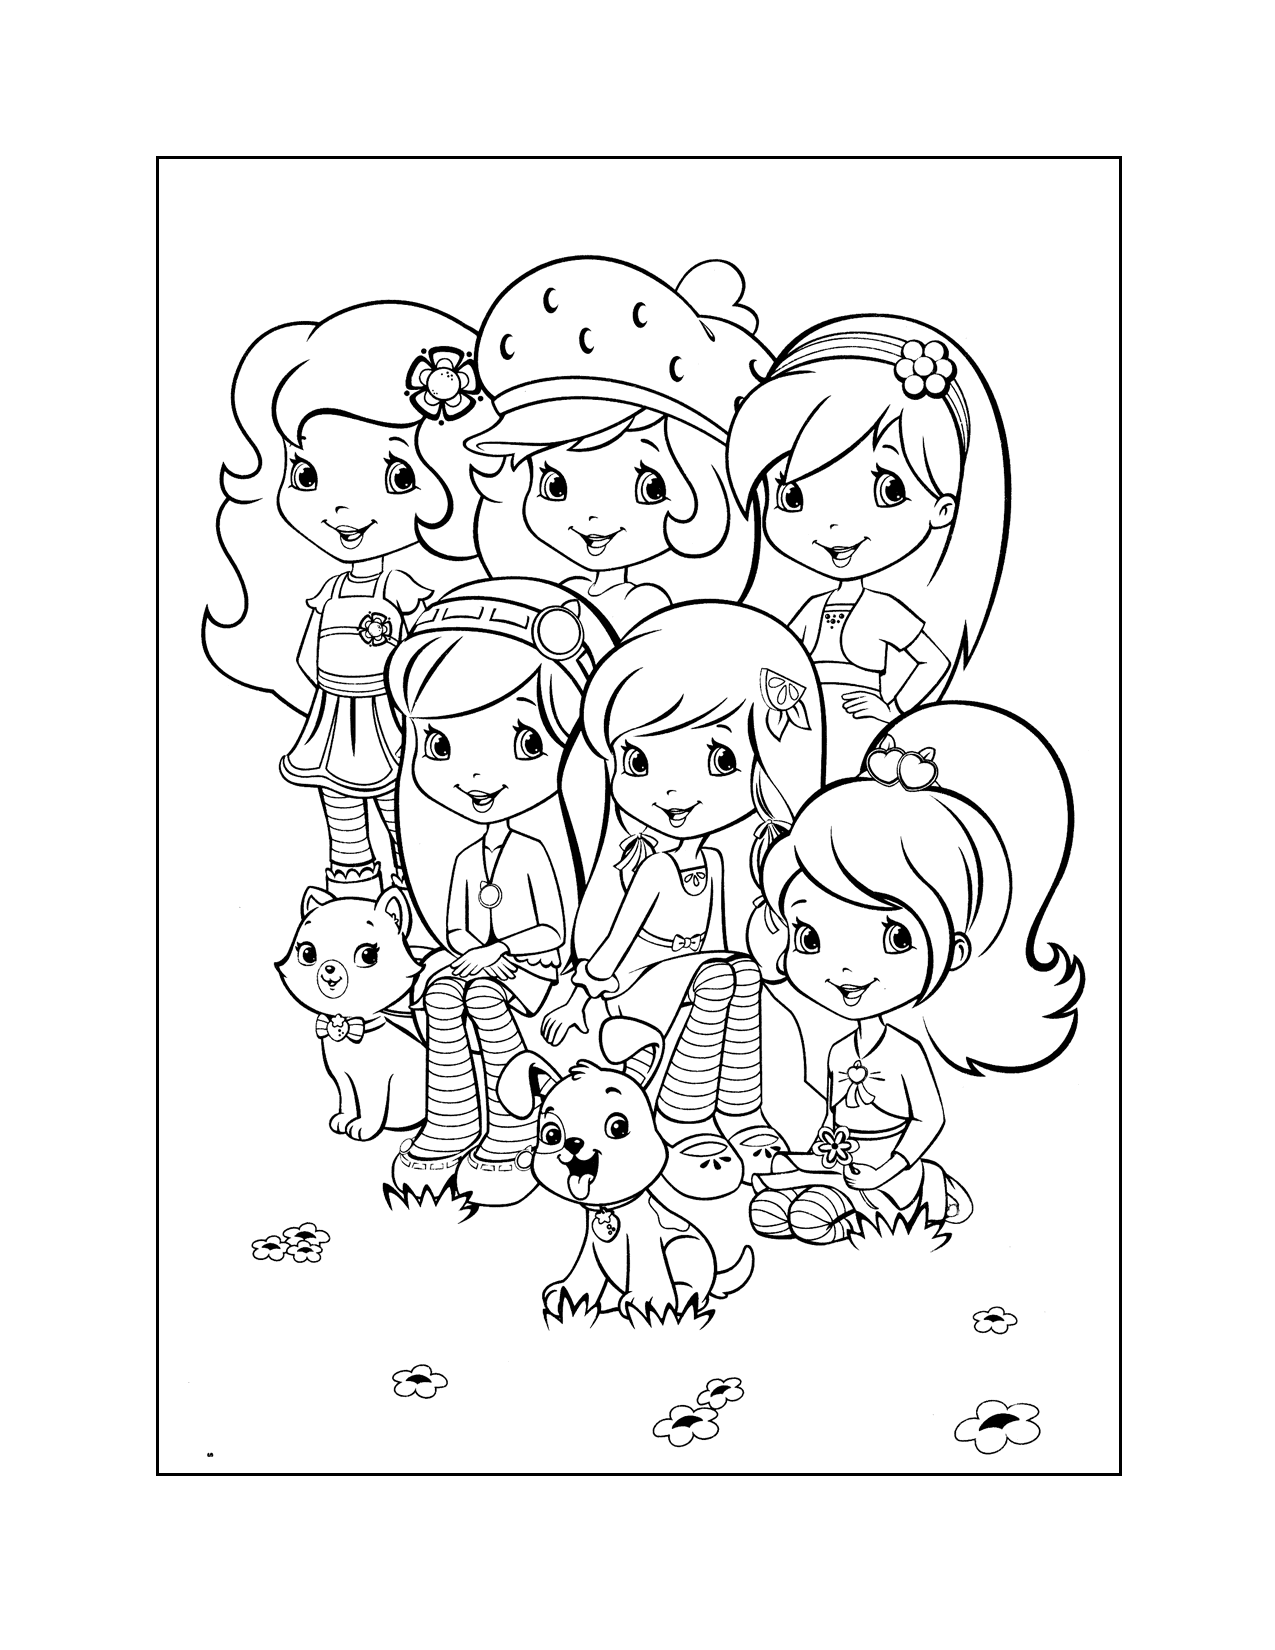 Strawberry Shortcake Characters Coloring Page